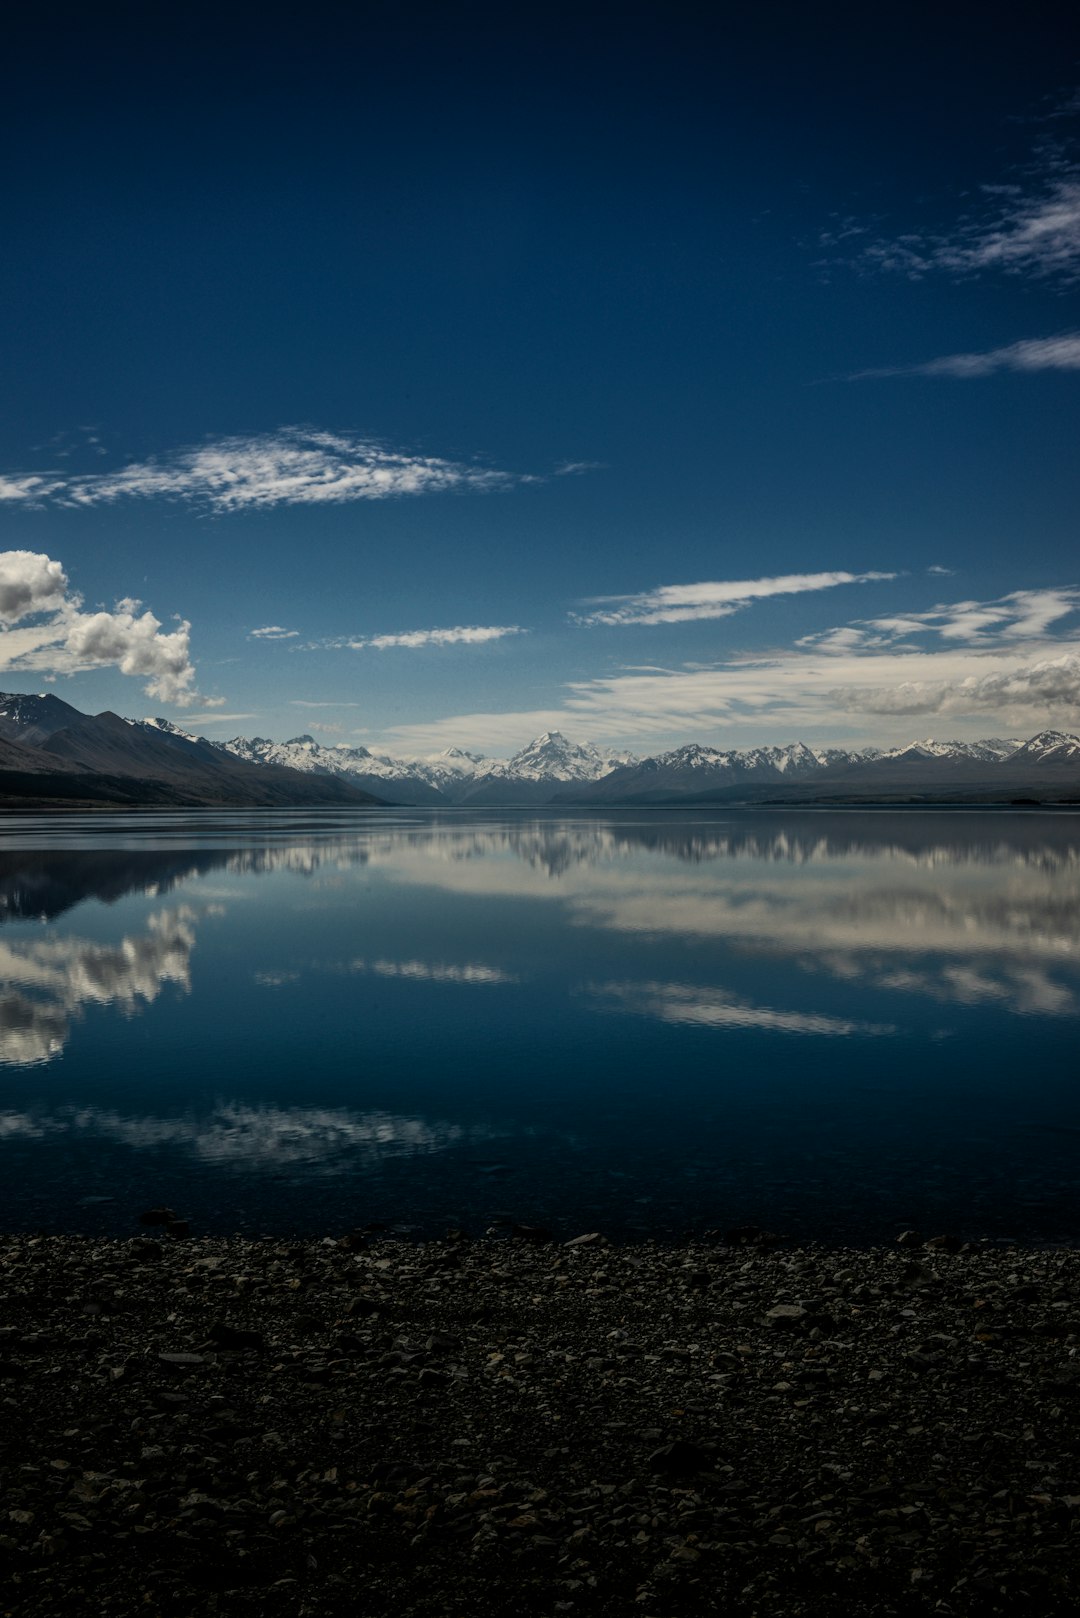 Travel Tips and Stories of Lake Pukaki in New Zealand